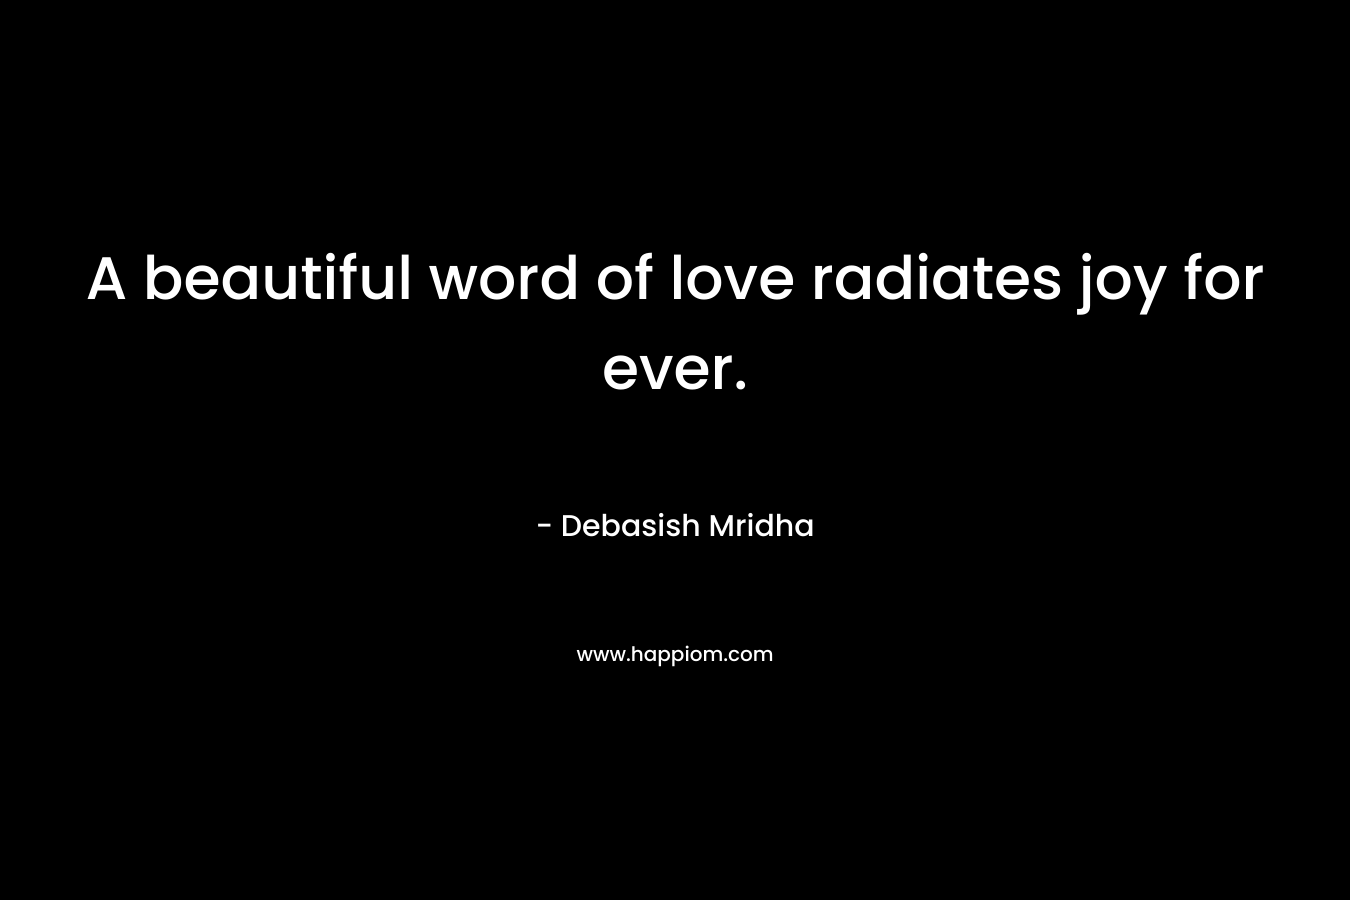 A beautiful word of love radiates joy for ever.